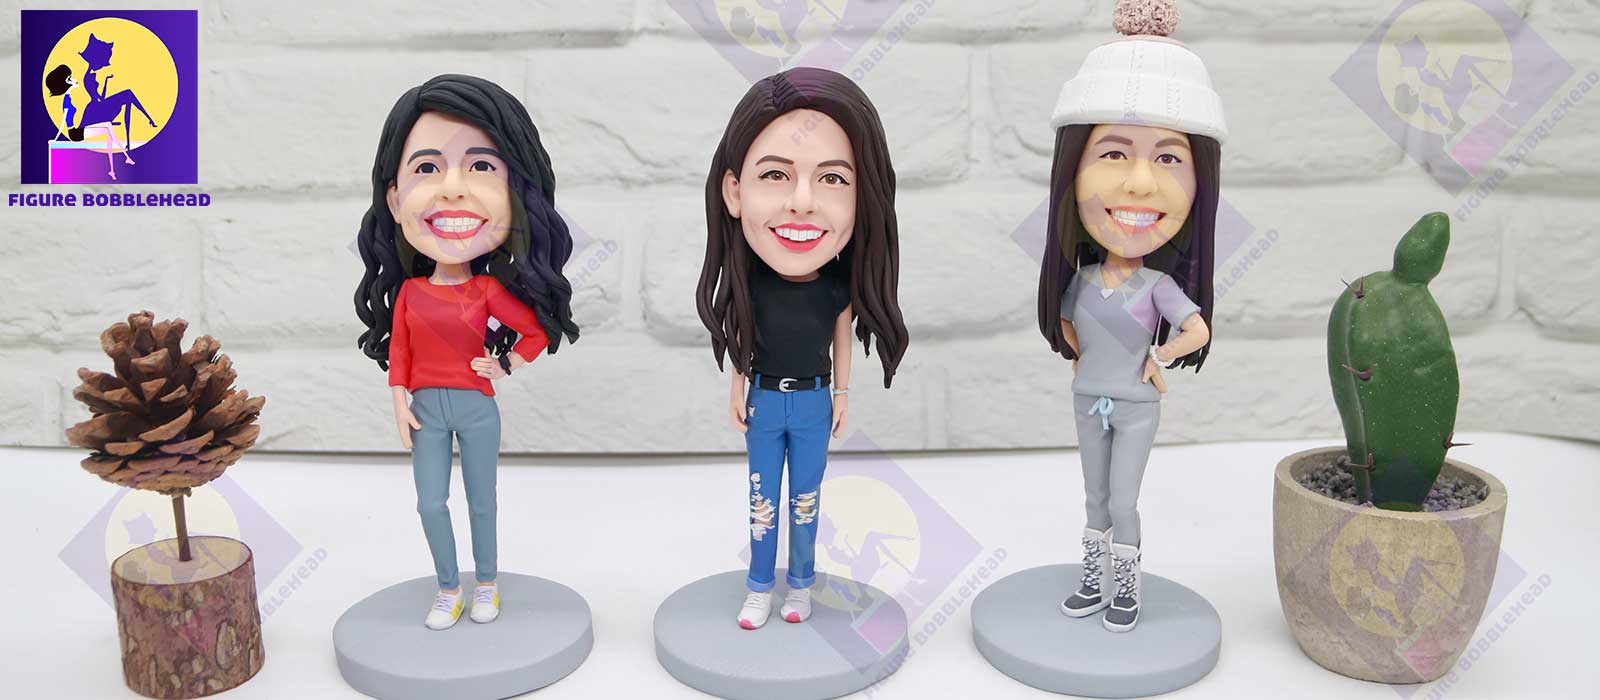 custom bobbleheads as mothers day gifts